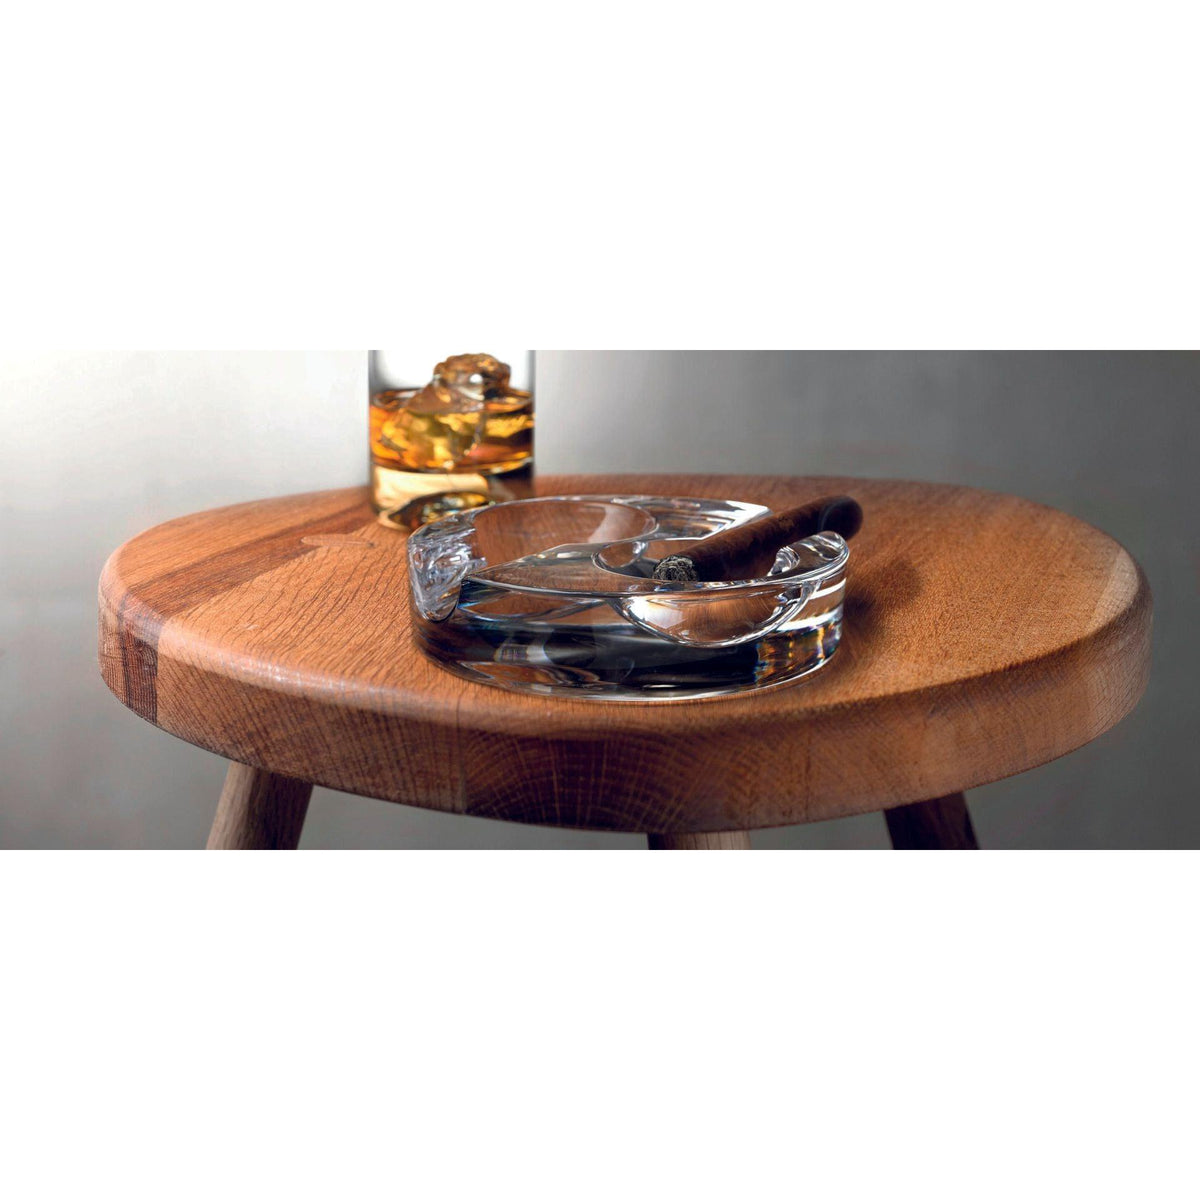 Small clear Glass Stackable Ashtray 4.25" (11cm) - BESPOKE77